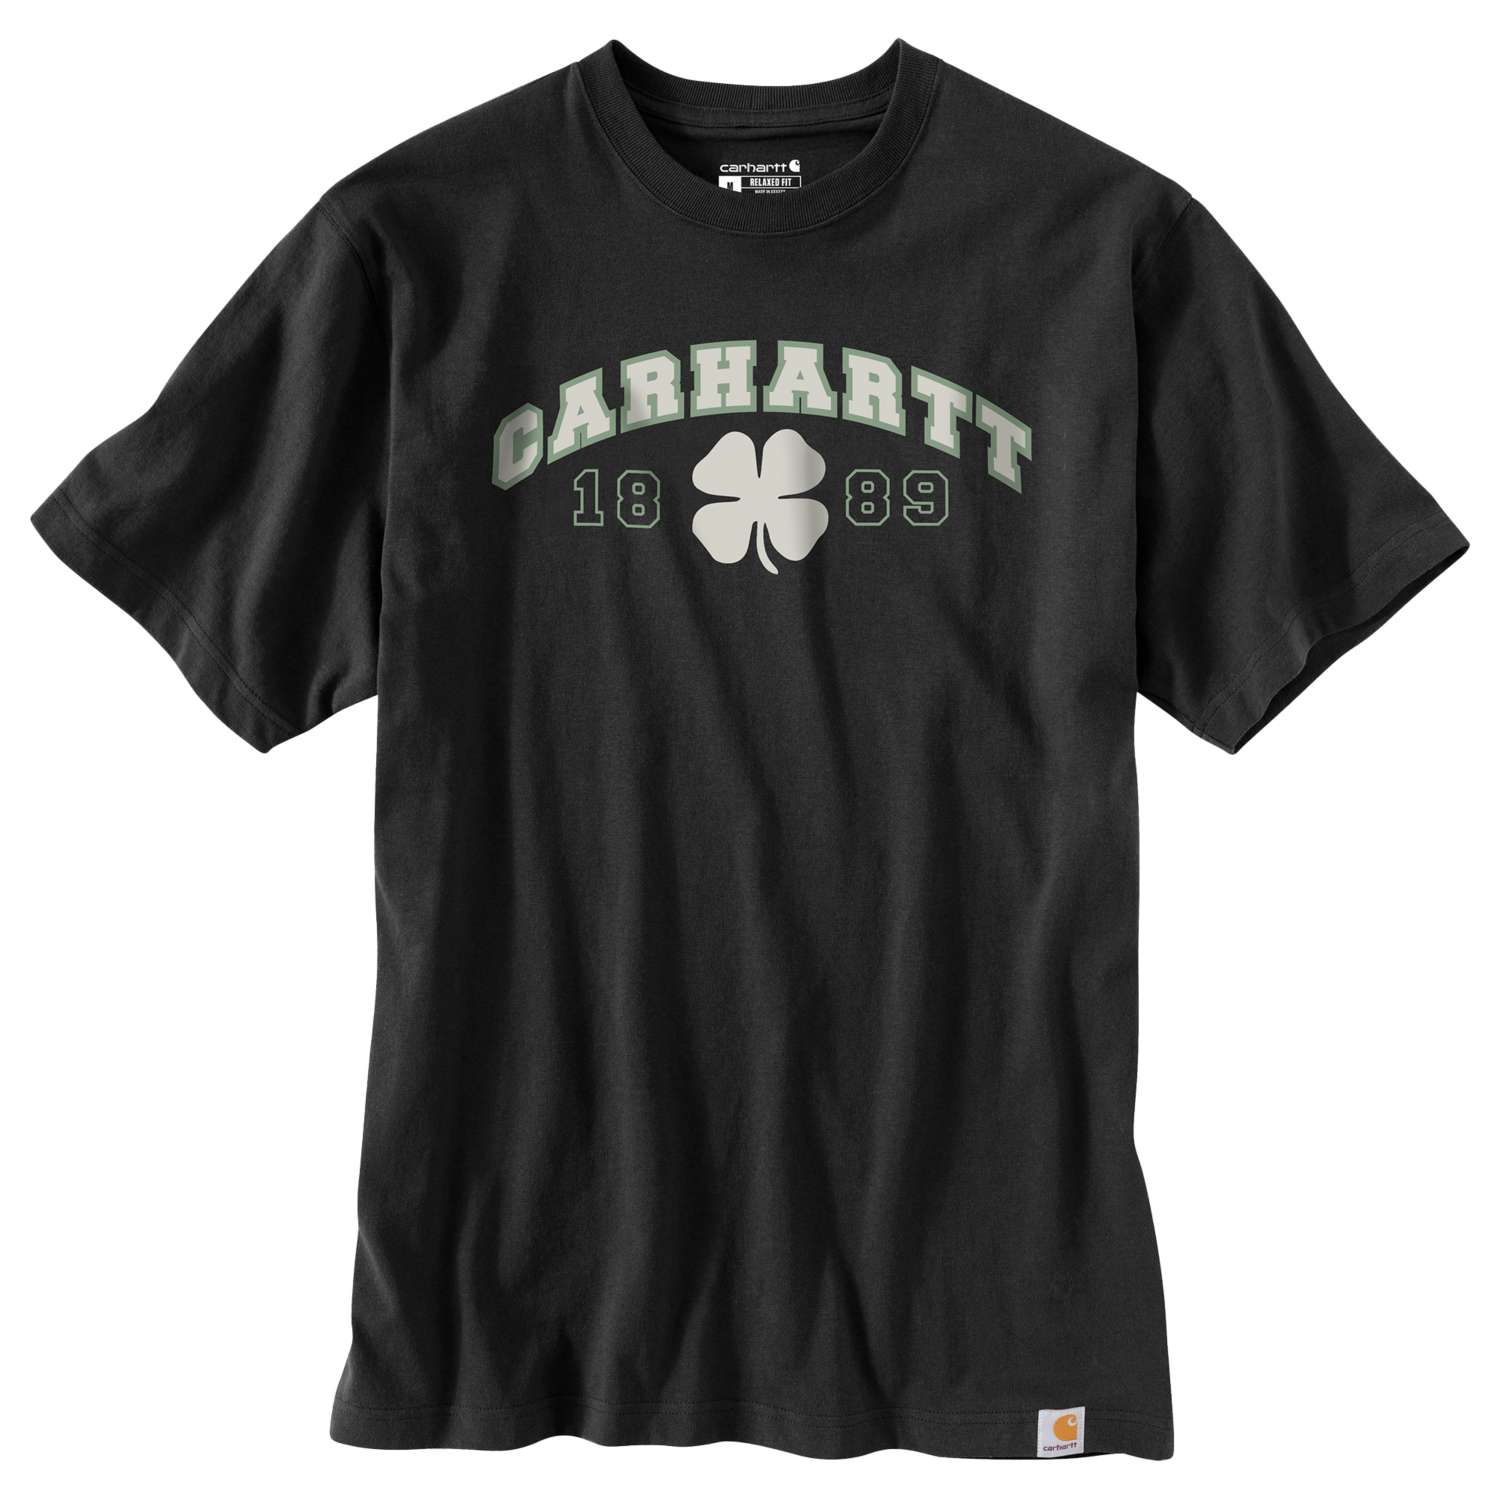 RELAXED_FIT_S_S_SHAMROCK_T-SHIRT_a494w386BS